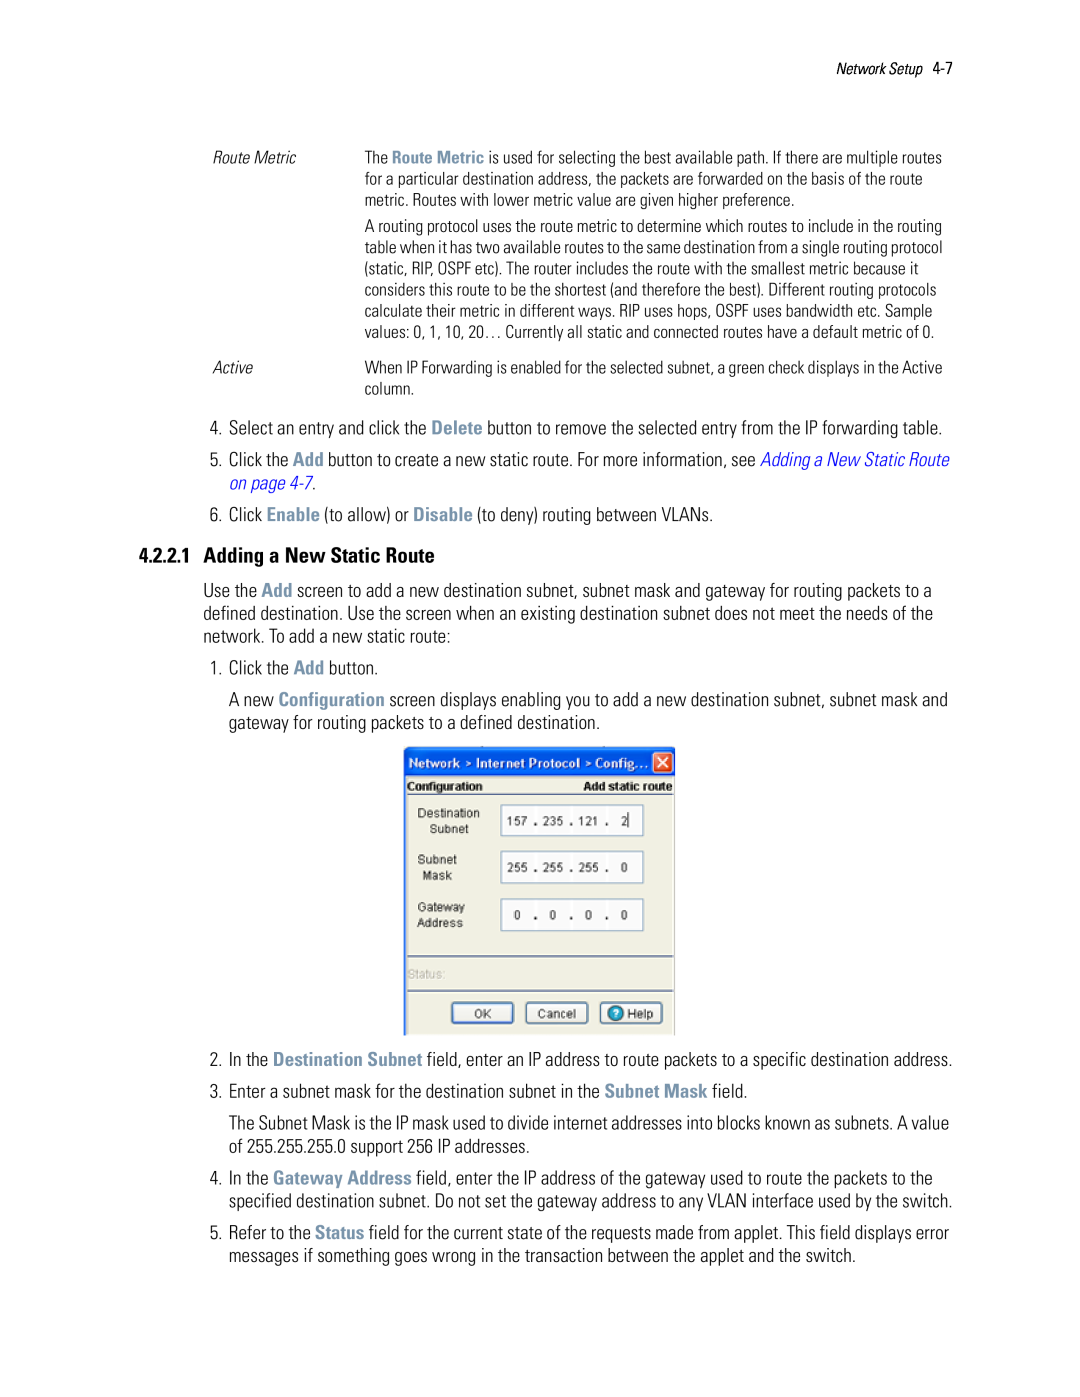 Motorola WS5100 manual 4.2.2.1Adding a New Static Route 